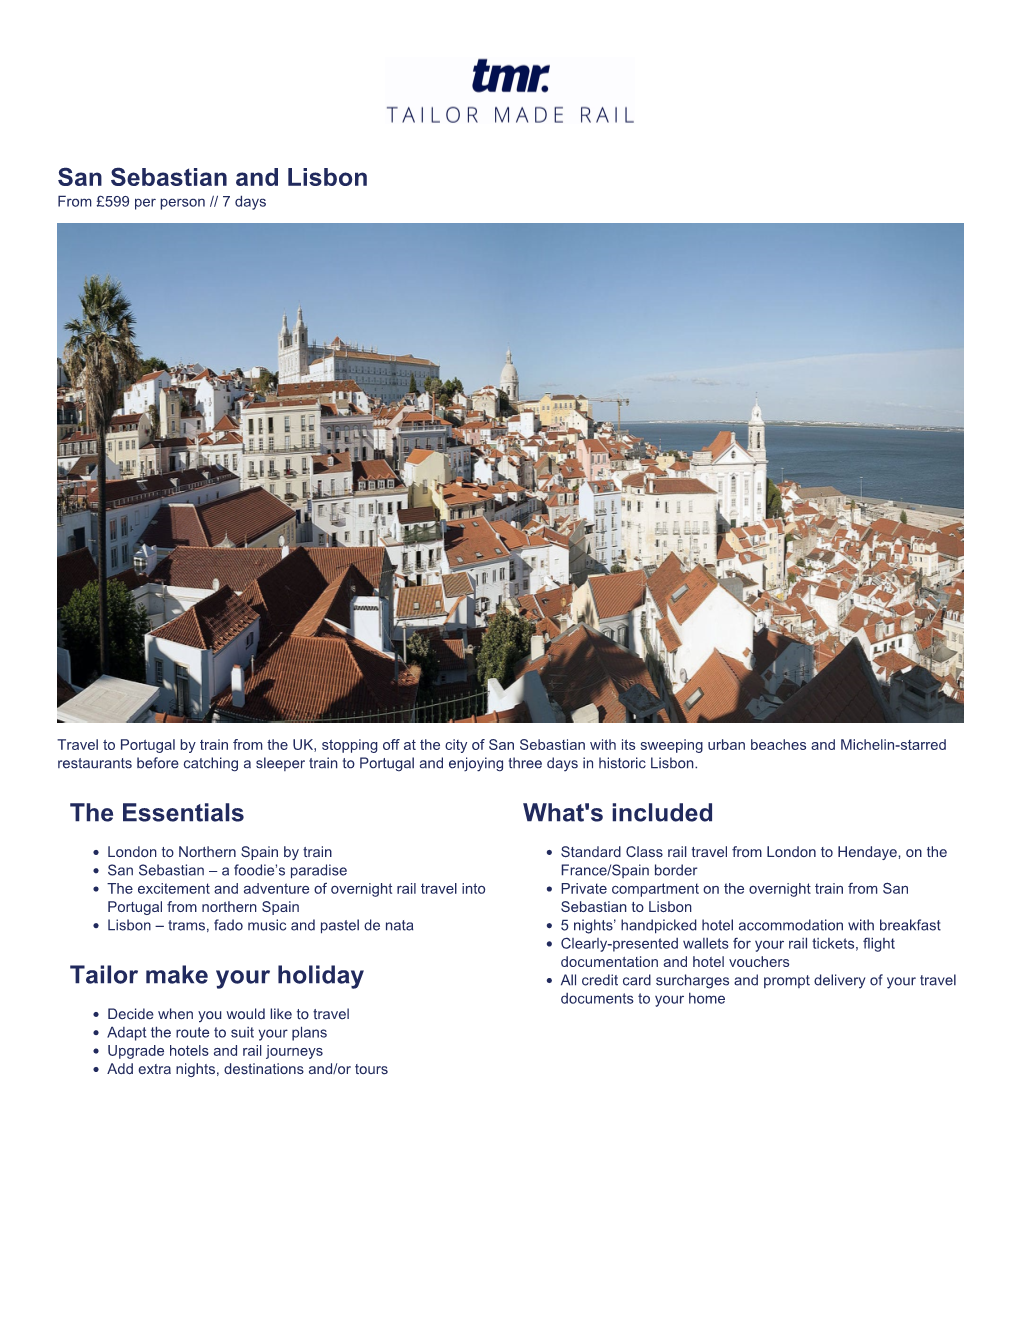 San Sebastian and Lisbon from £599 Per Person // 7 Days